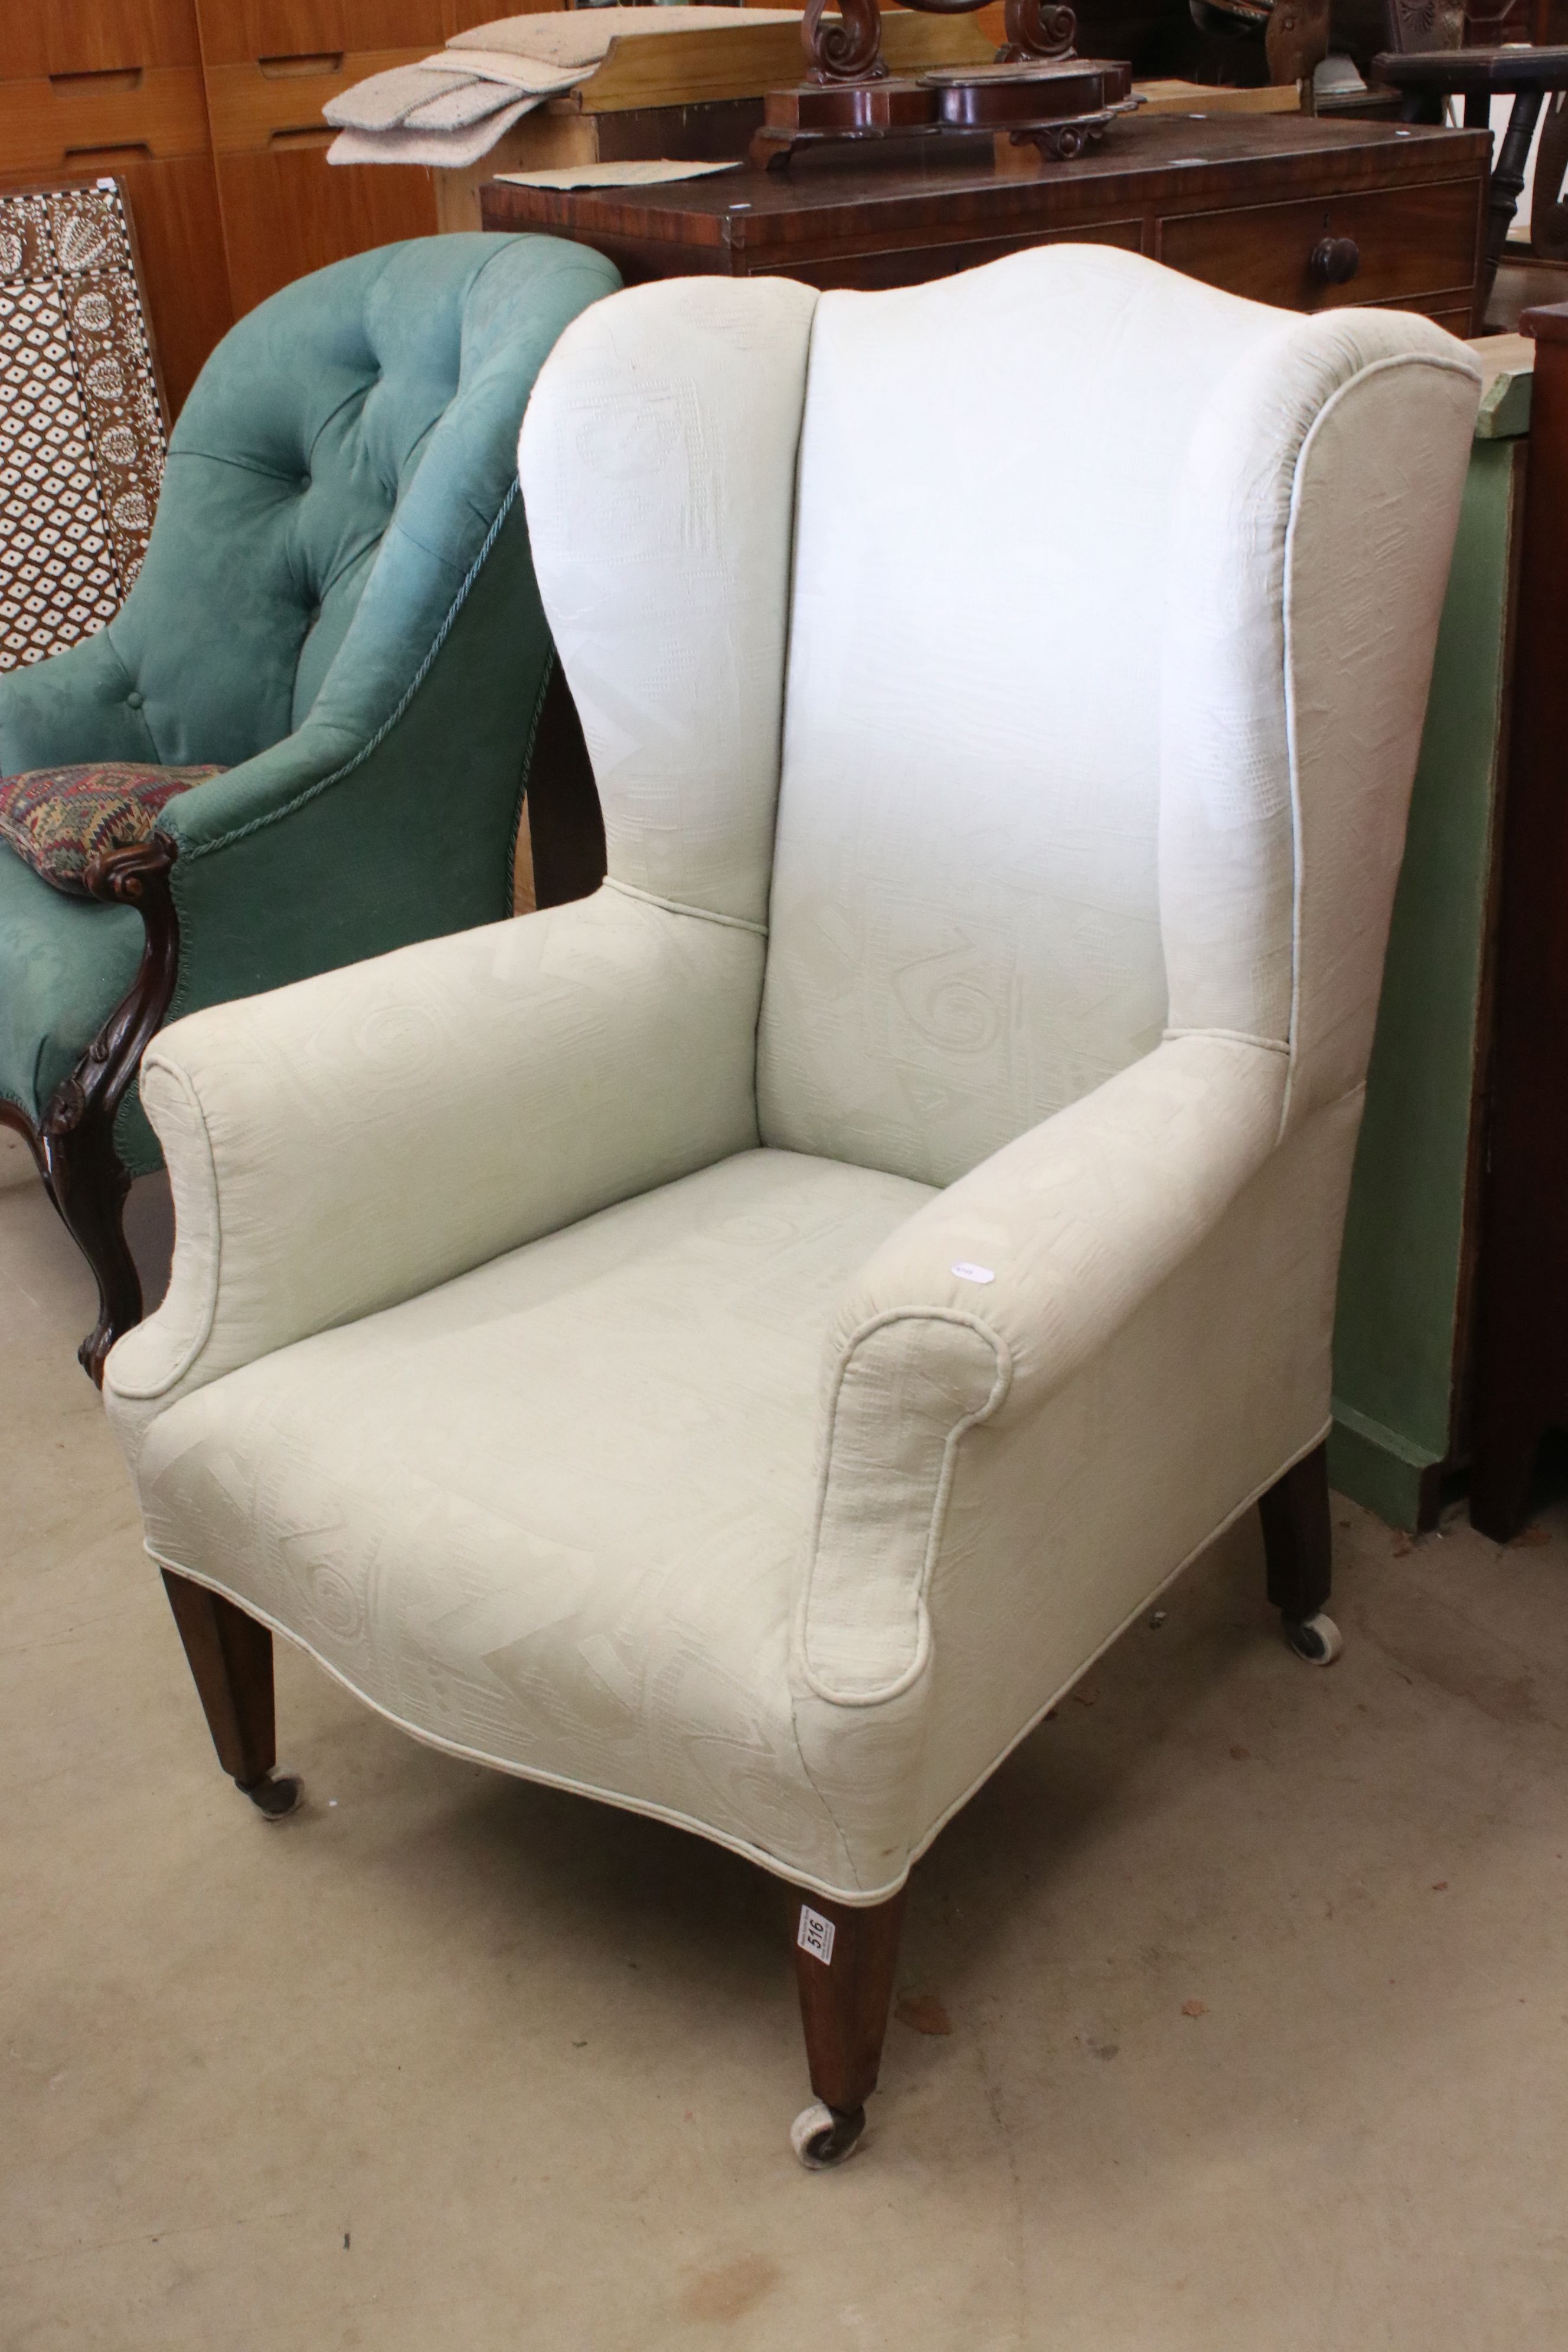 Late 19th / Early 20th century Wing Back Armchair upholstered in pale green fabric and raised on